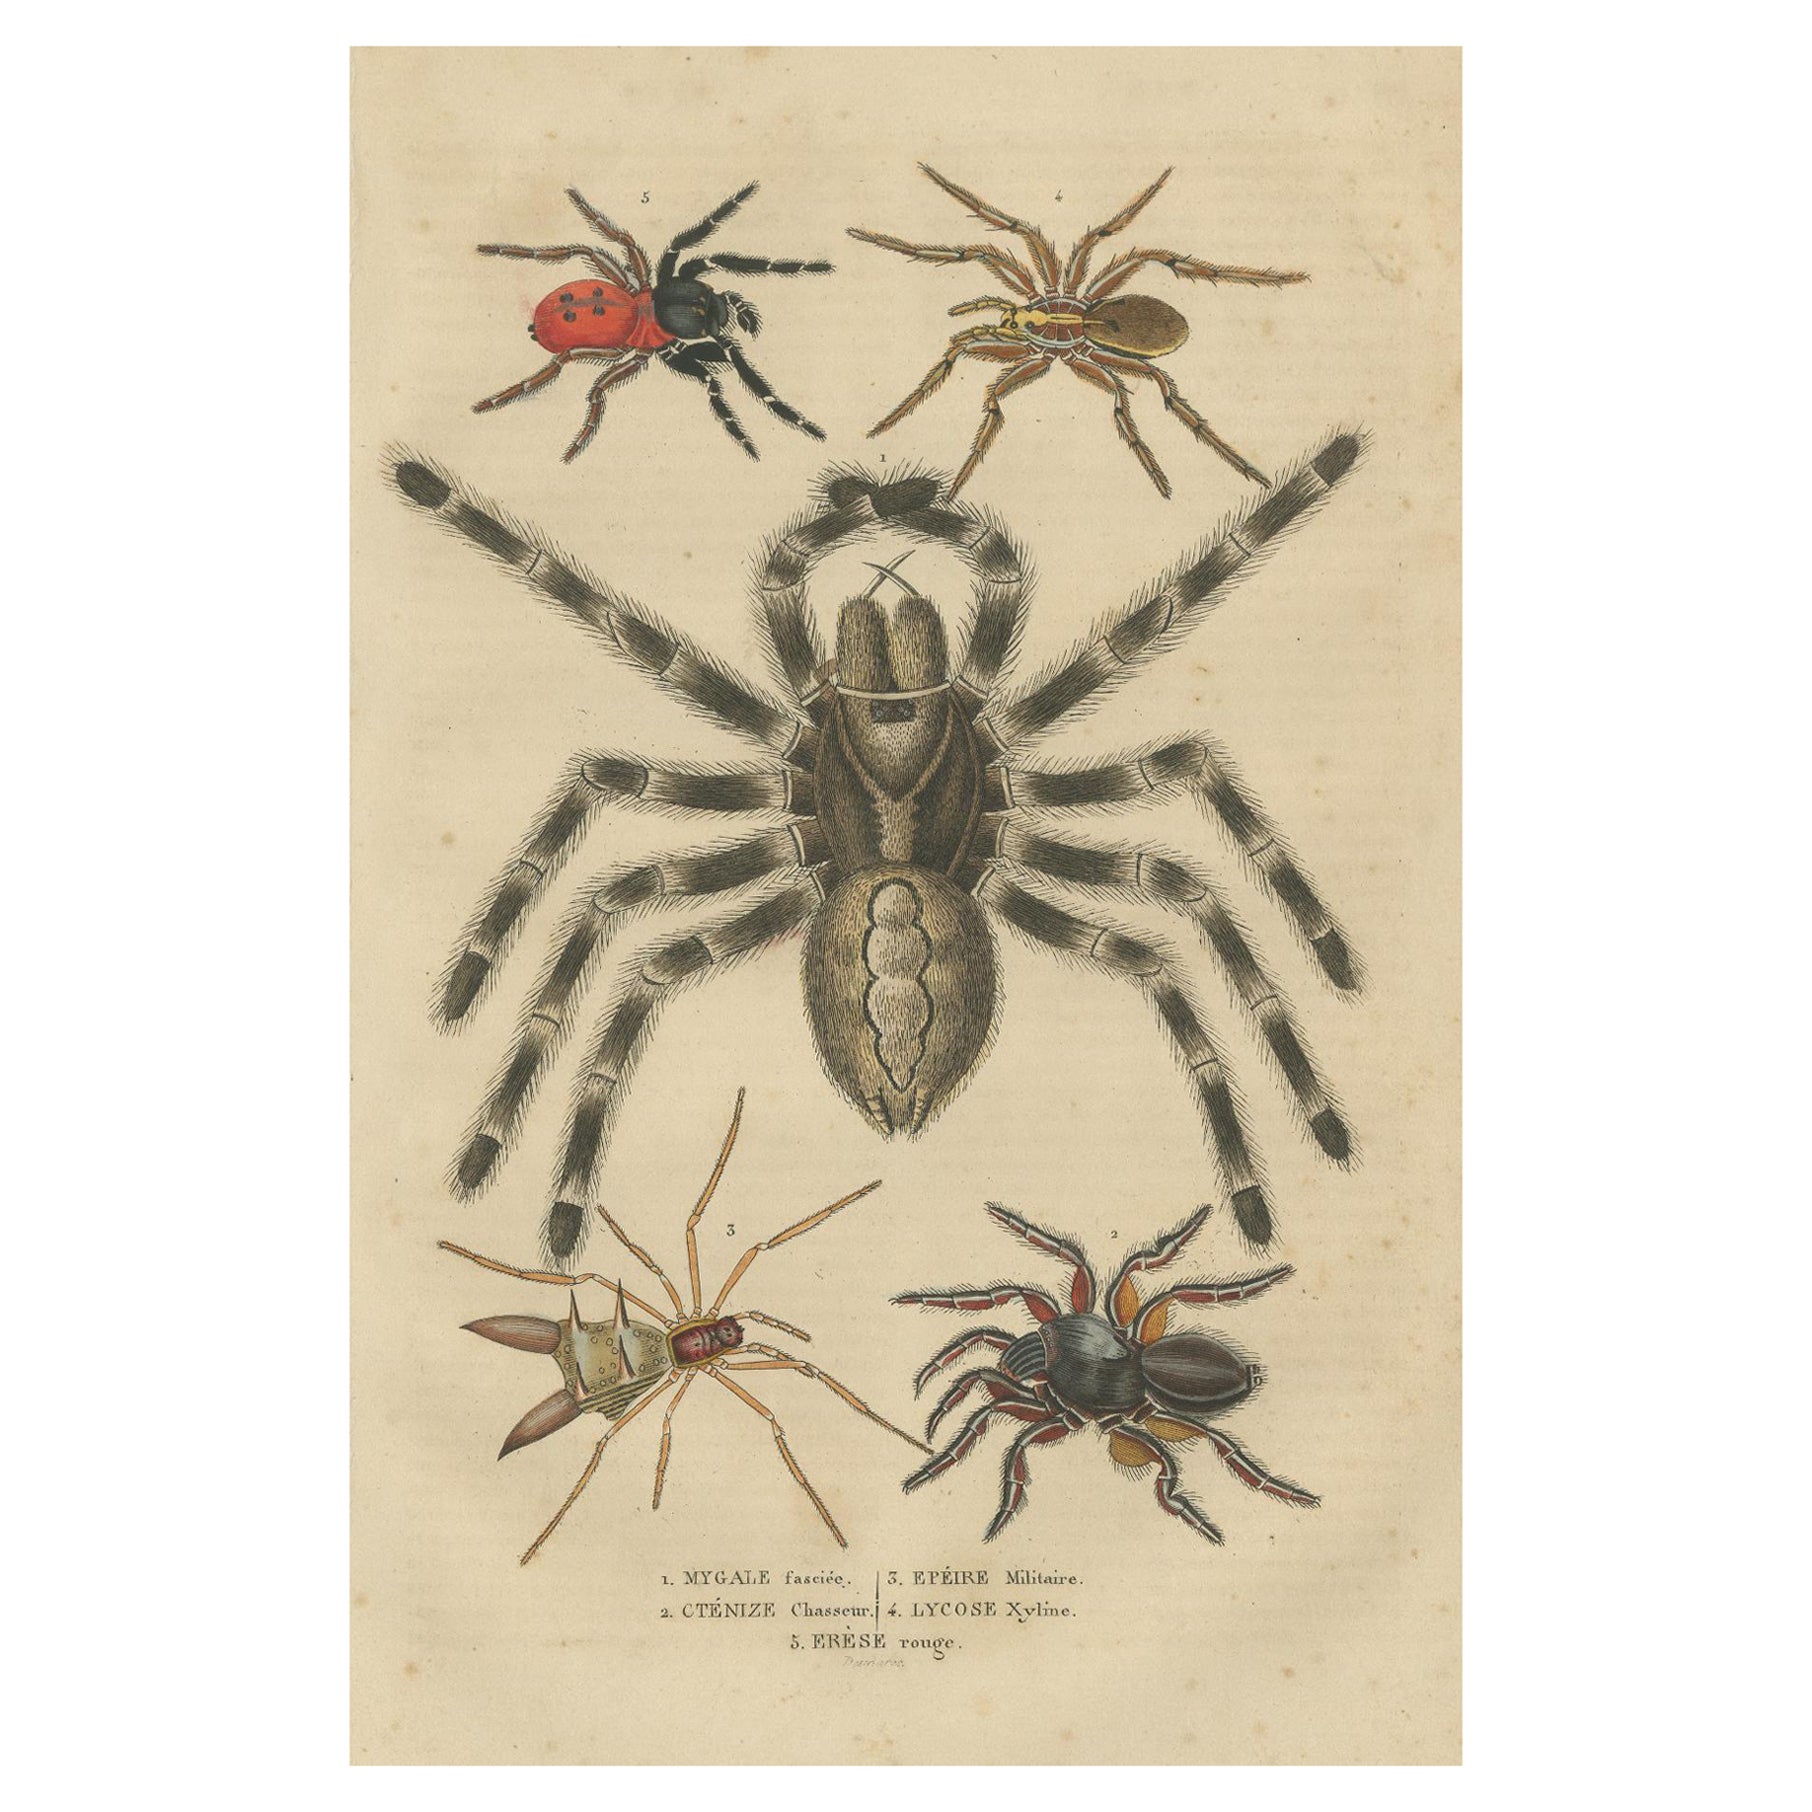 Antique 1845 Arachnid Study: Handcolored Engraving of Varied Spider Species For Sale